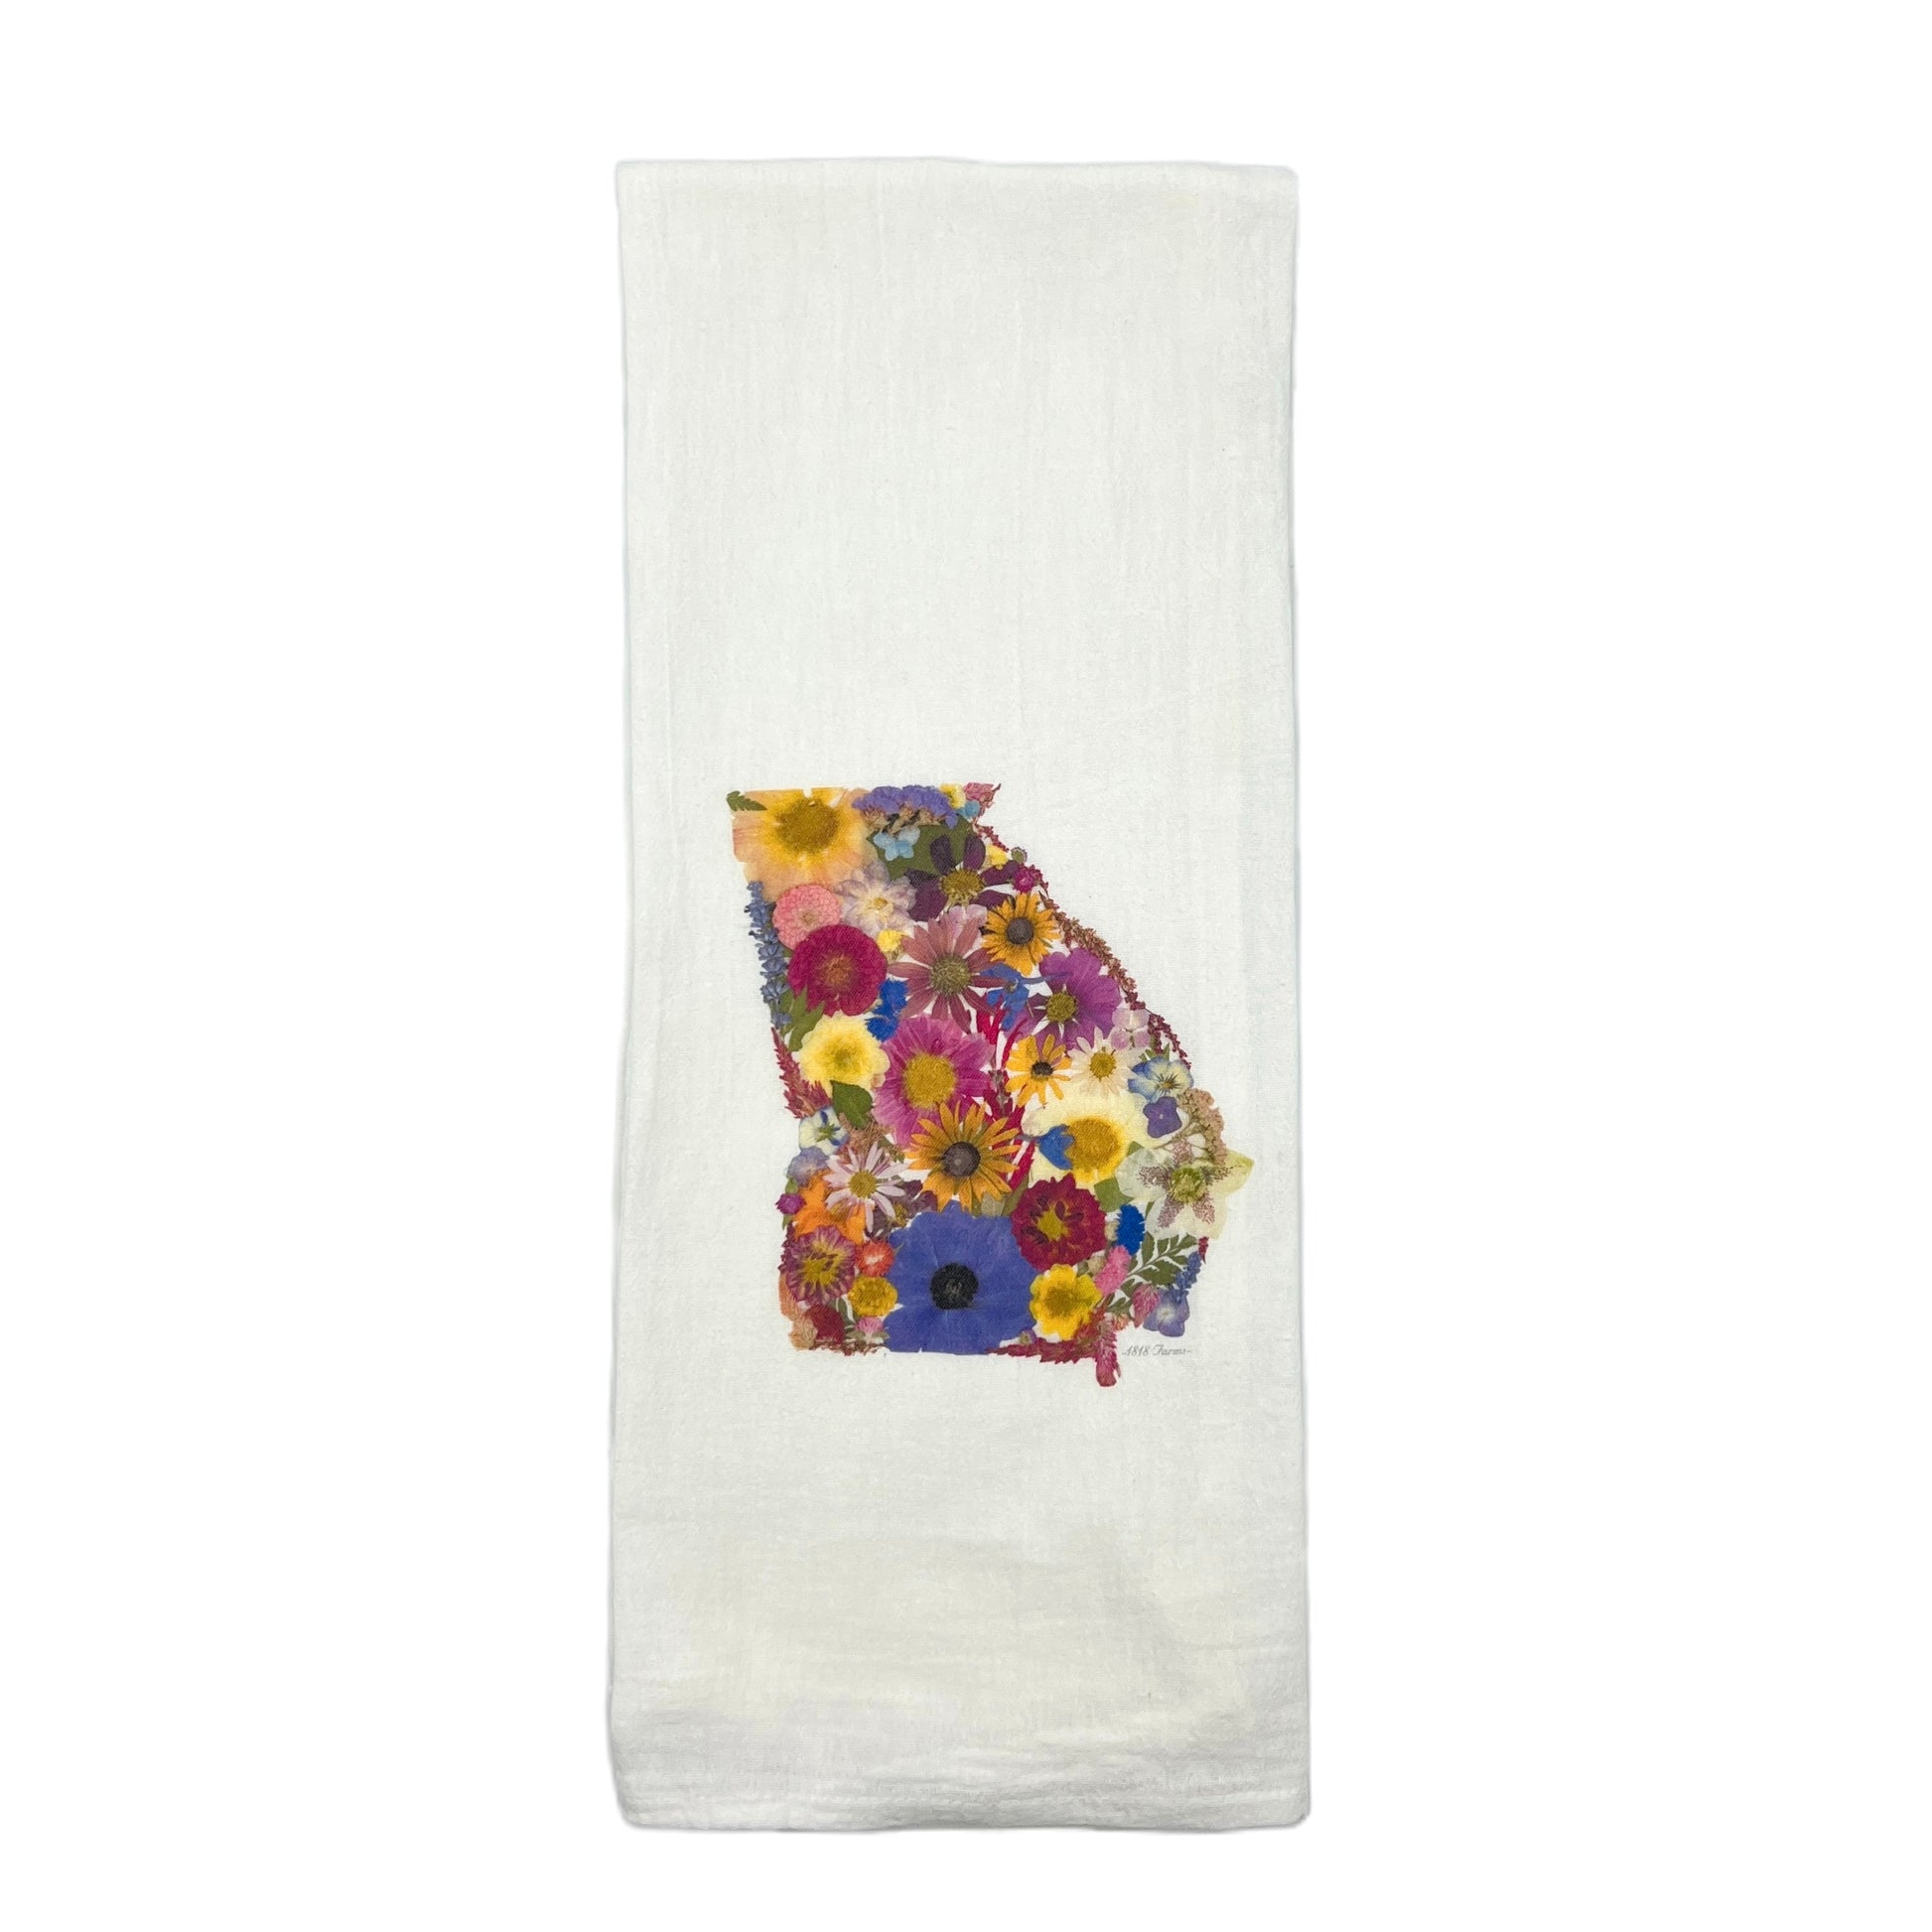 State Themed Flour Sack Towel Featuring Dried, Pressed Flowers - "Where I Bloom" Collection Towel 1818 Farms Georgia  